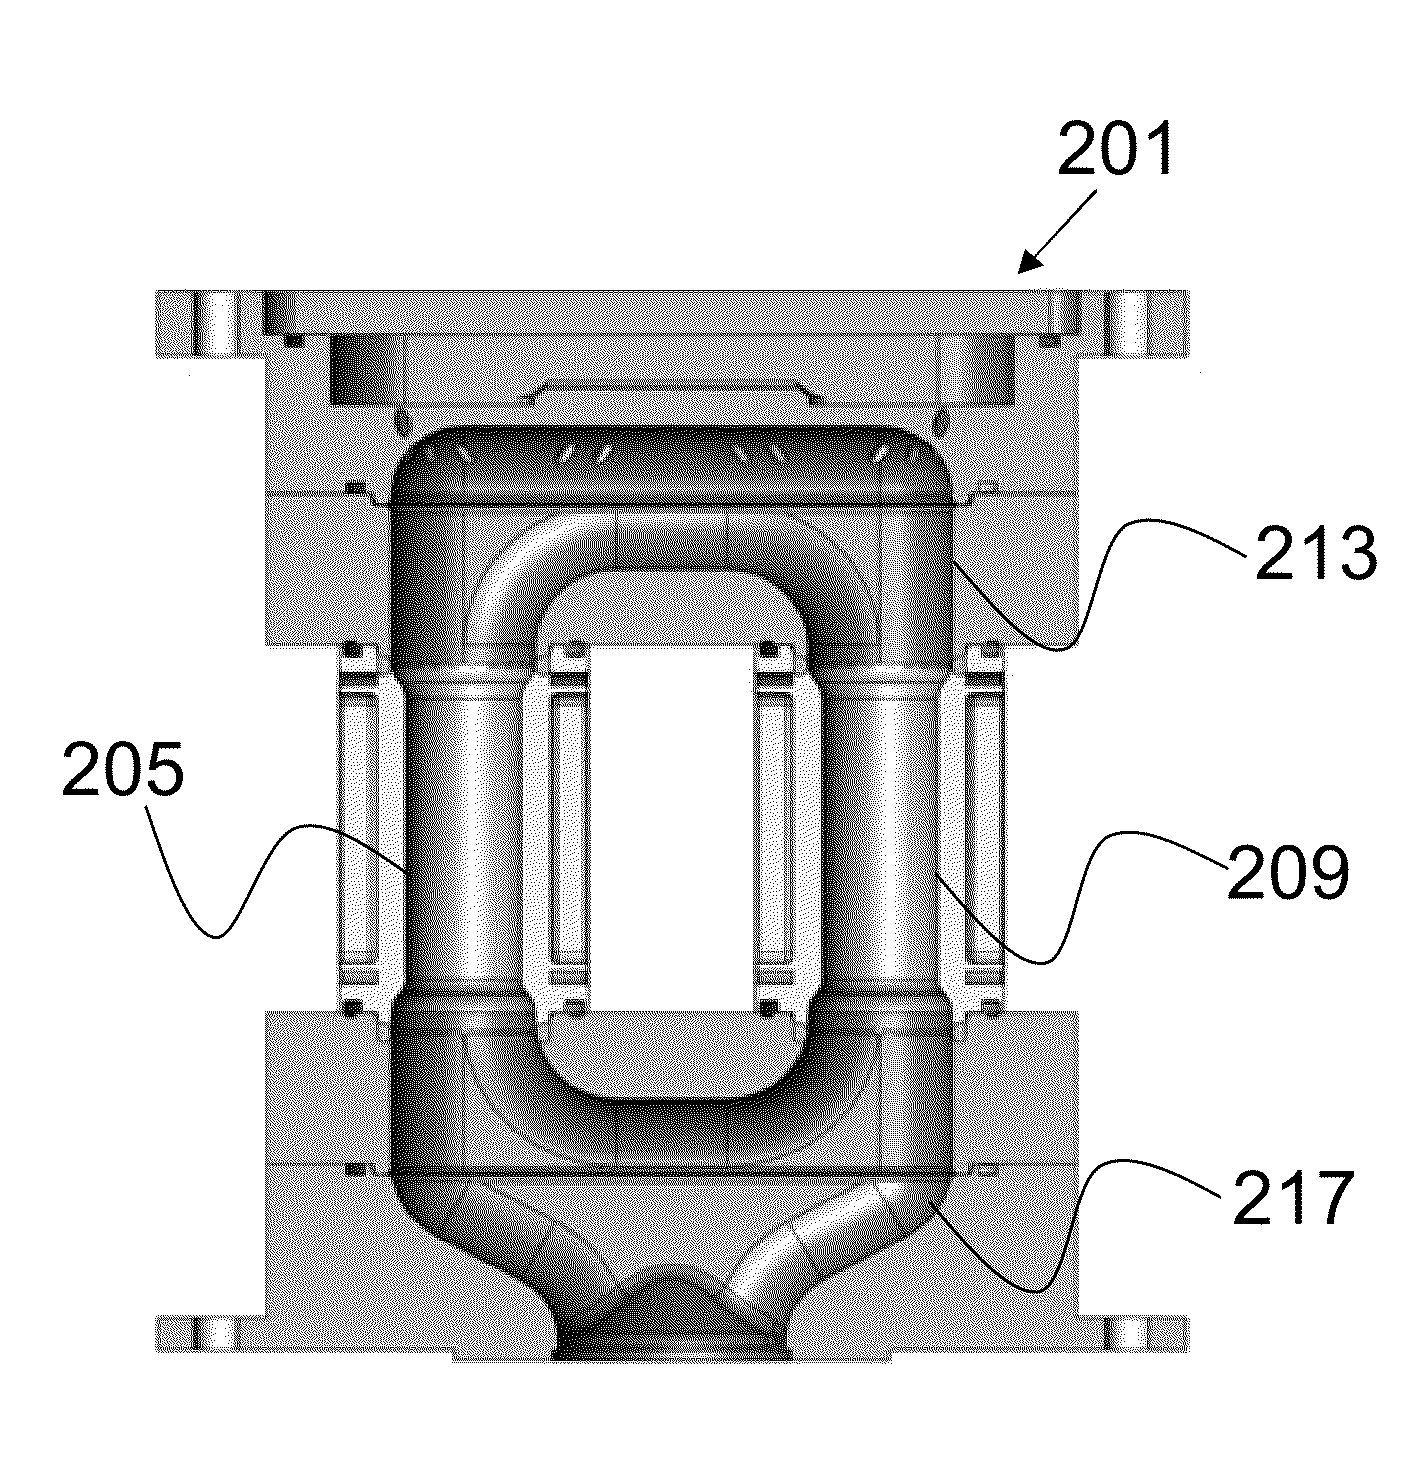 Toroidal Plasma Channel with Varying Cross-Section Areas Along the Channel